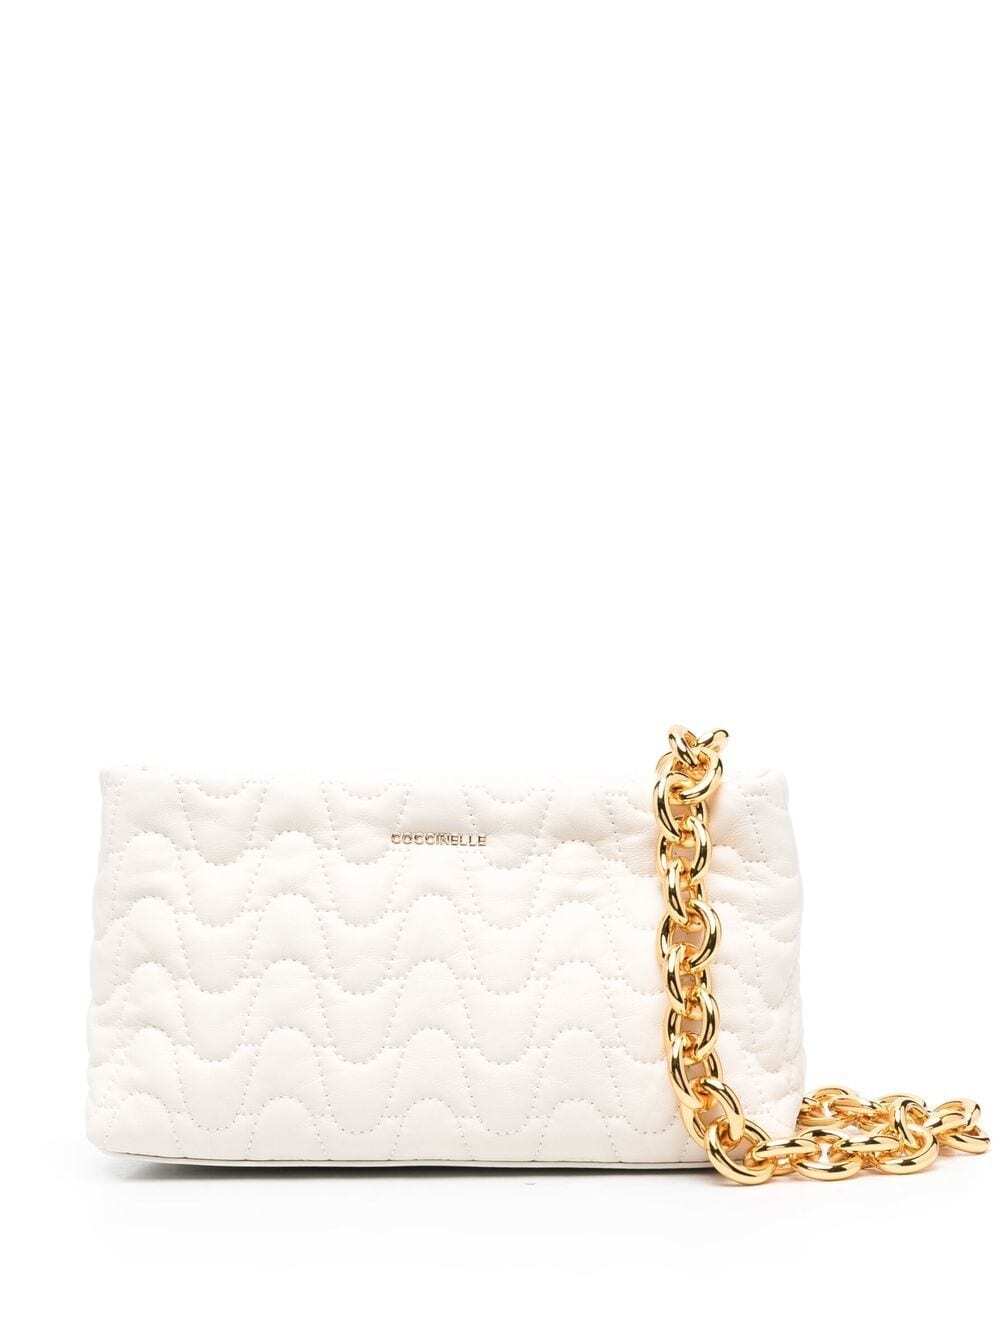 Coccinelle quilted leather shoulder bag - White